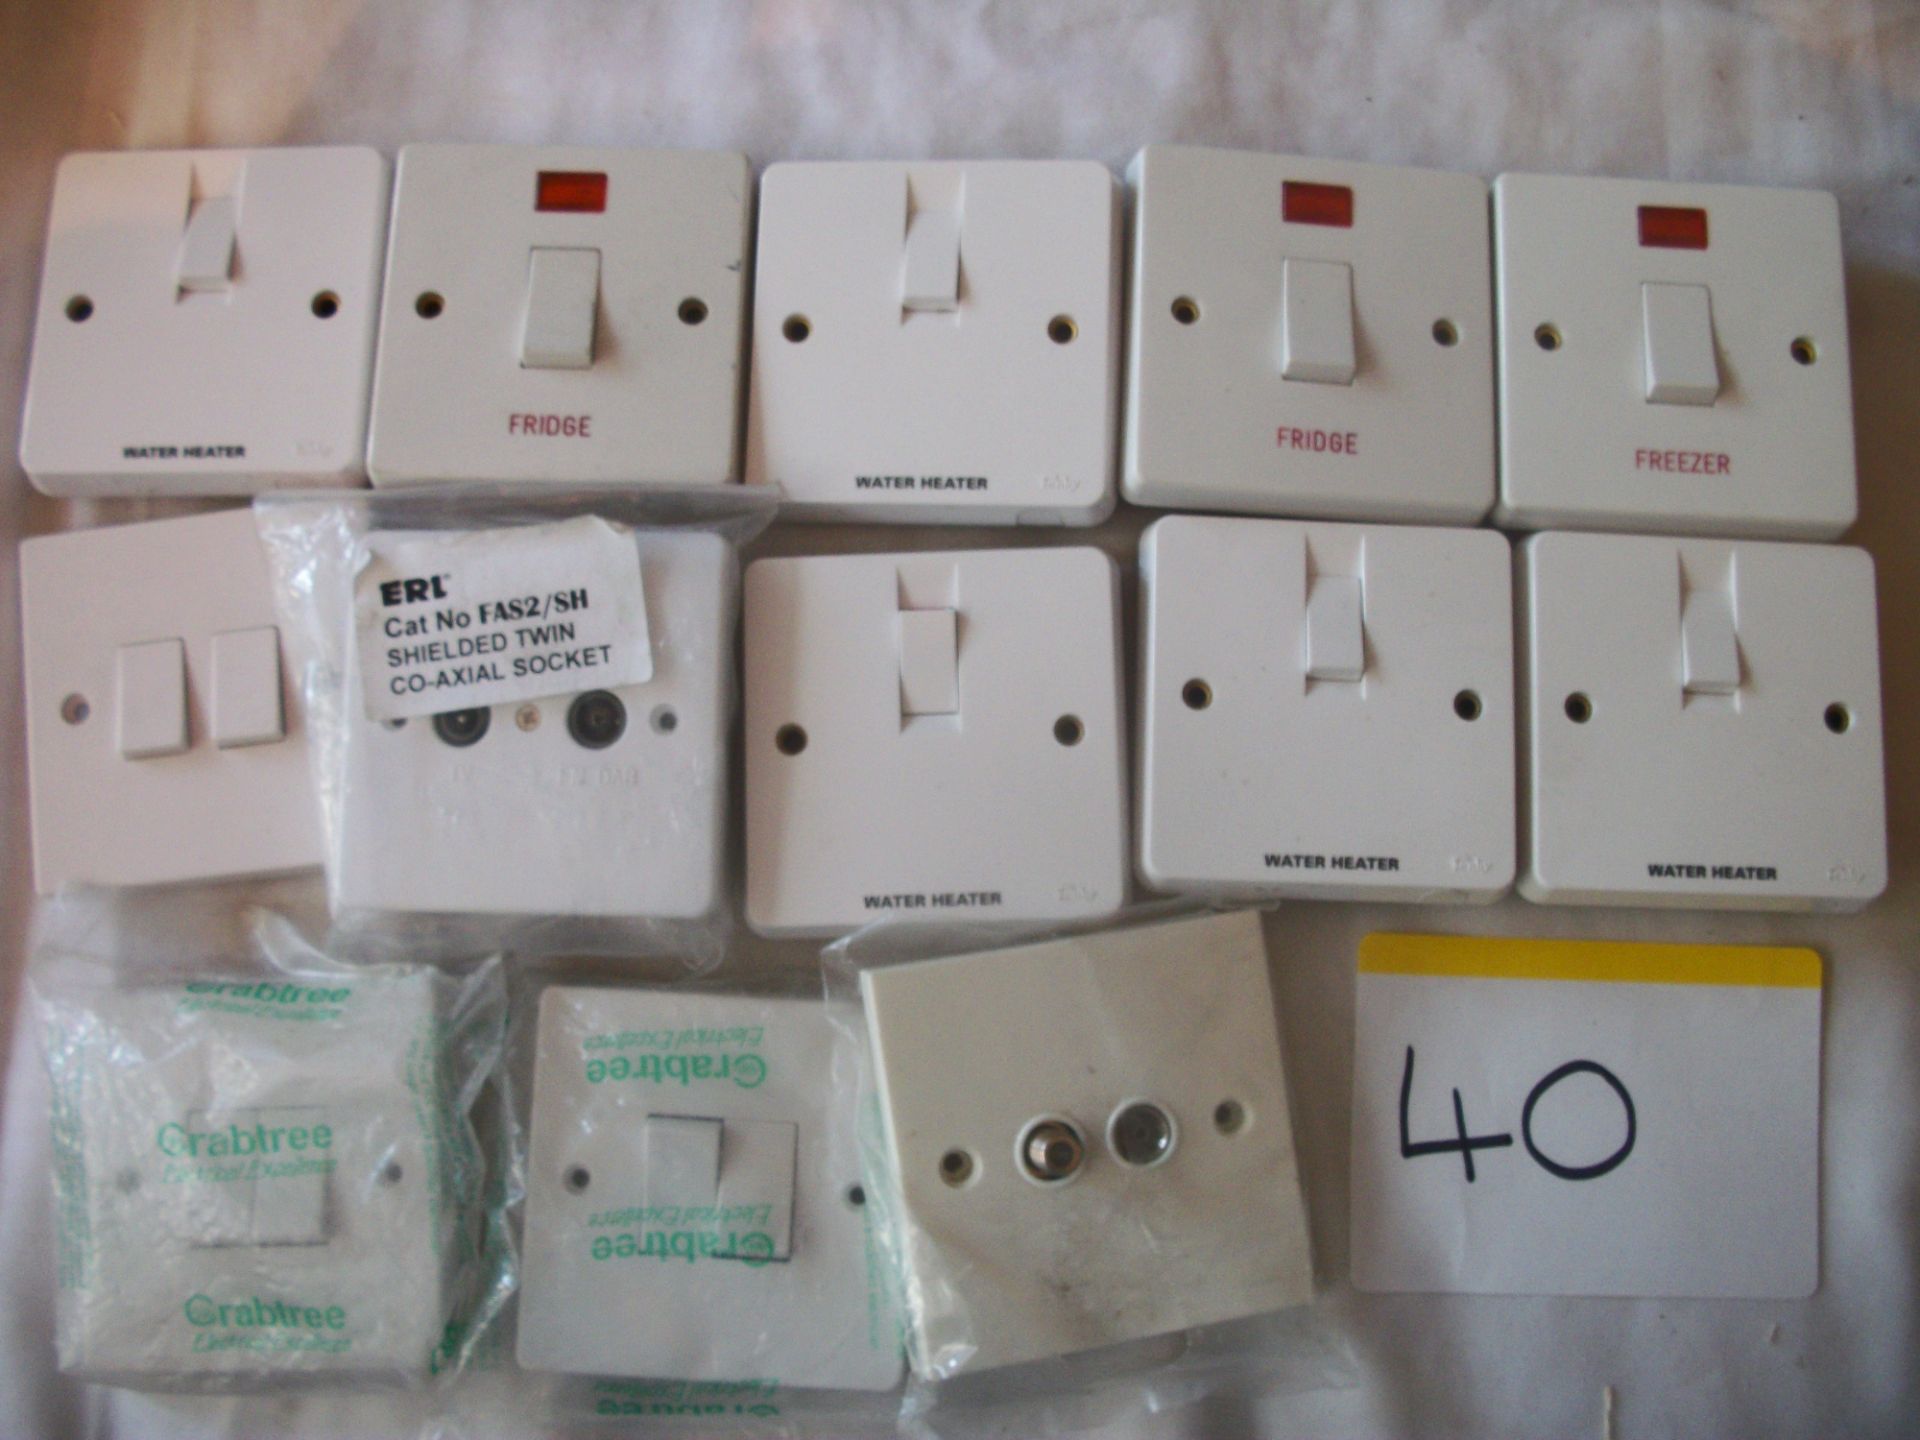 13 x Various Electrical Switches